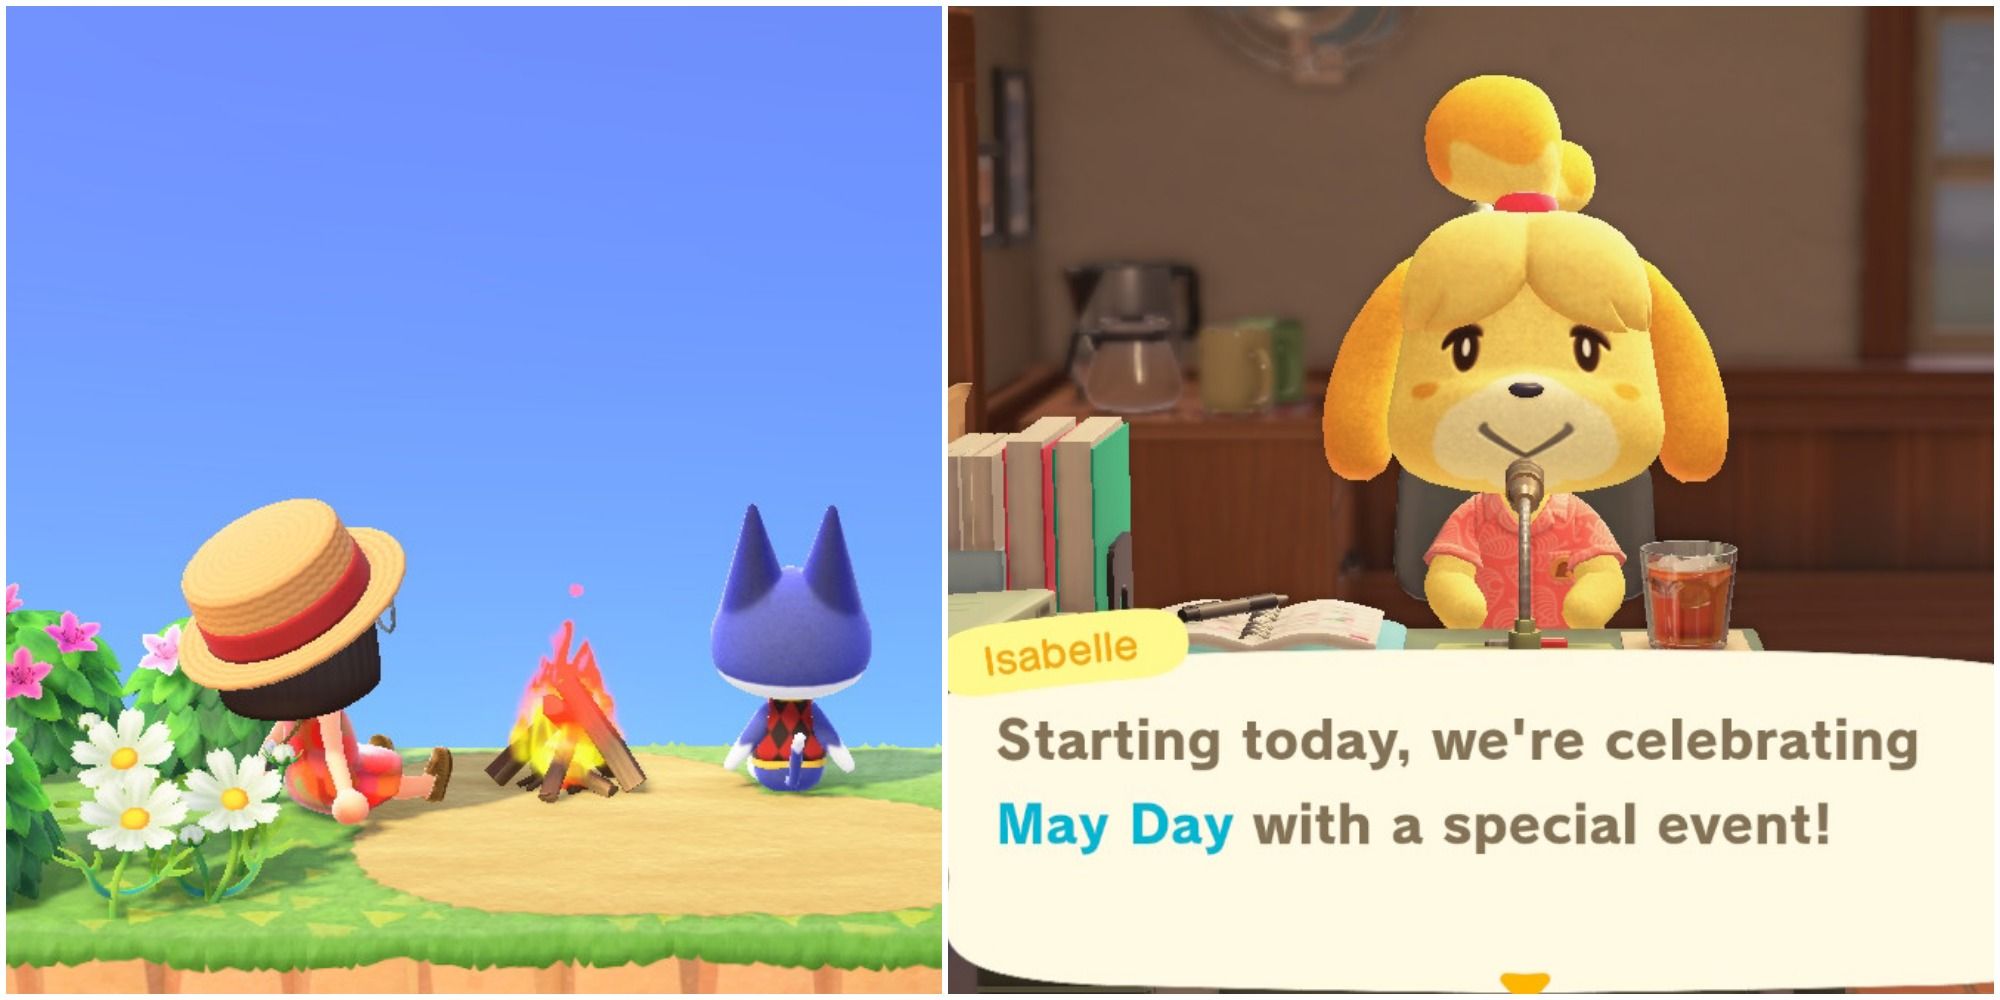 How To Solve Rover's 2021 May Day Maze In Animal Crossing New Horizons